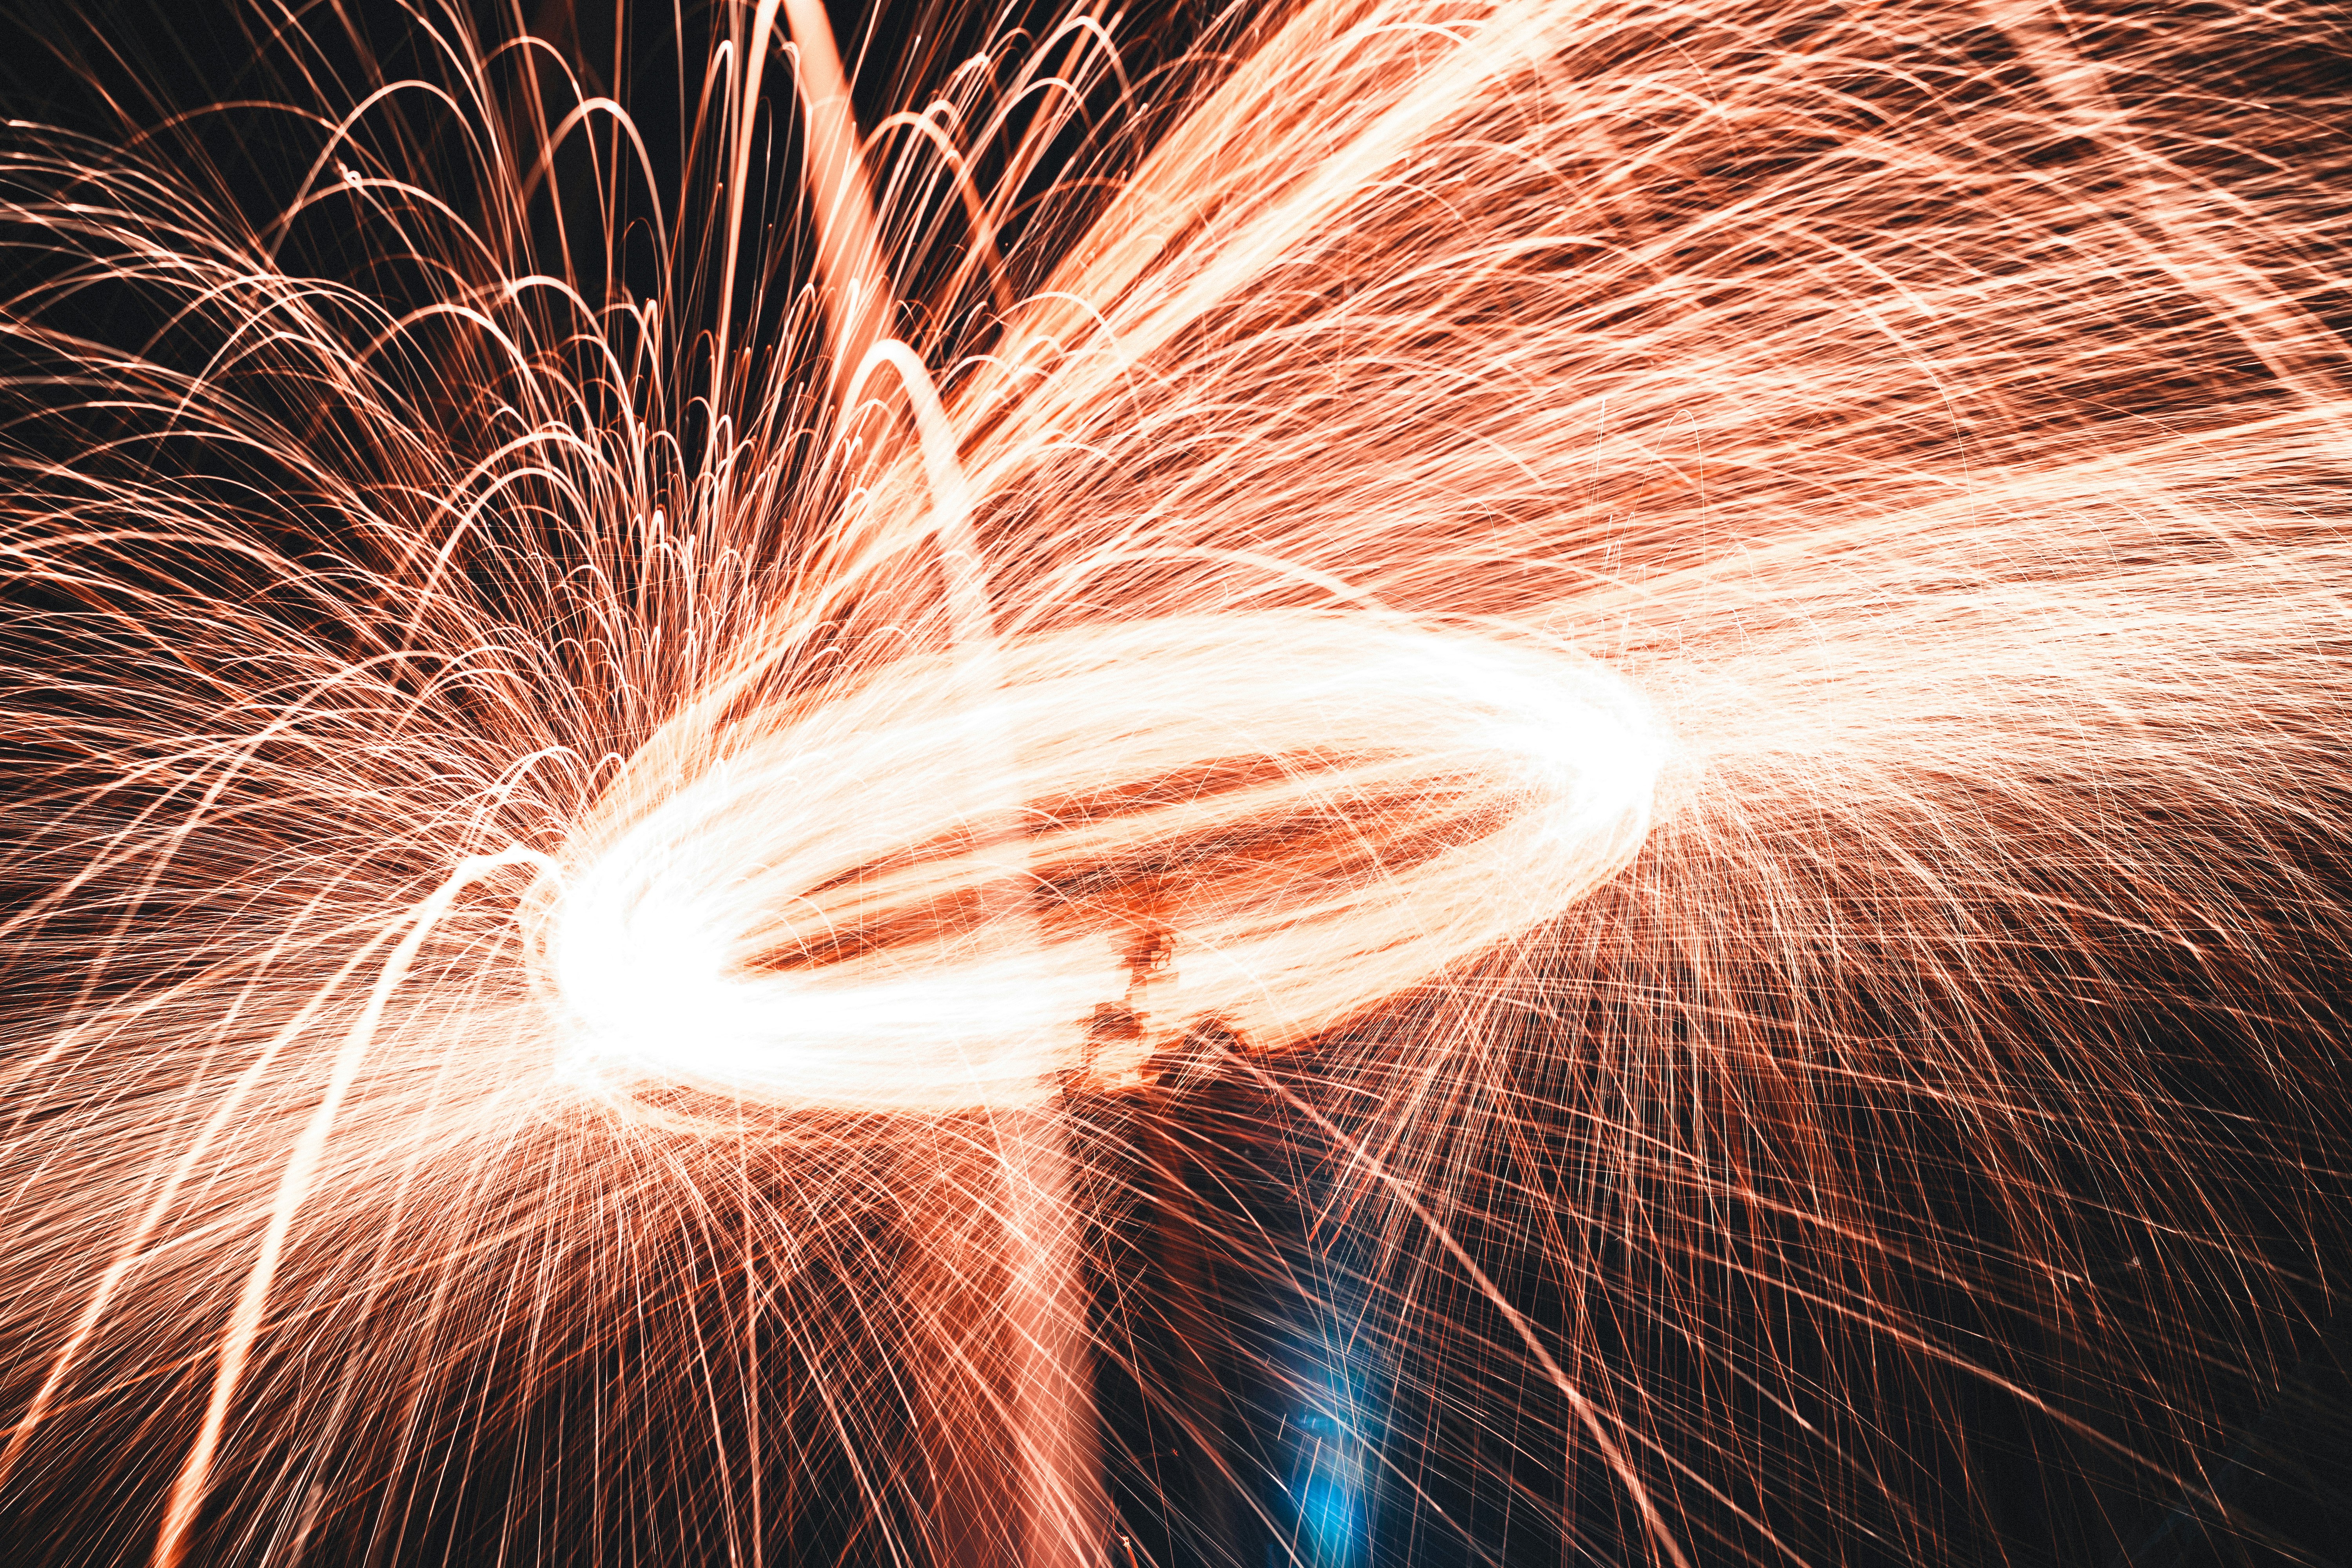 steel wool photography of fireworks